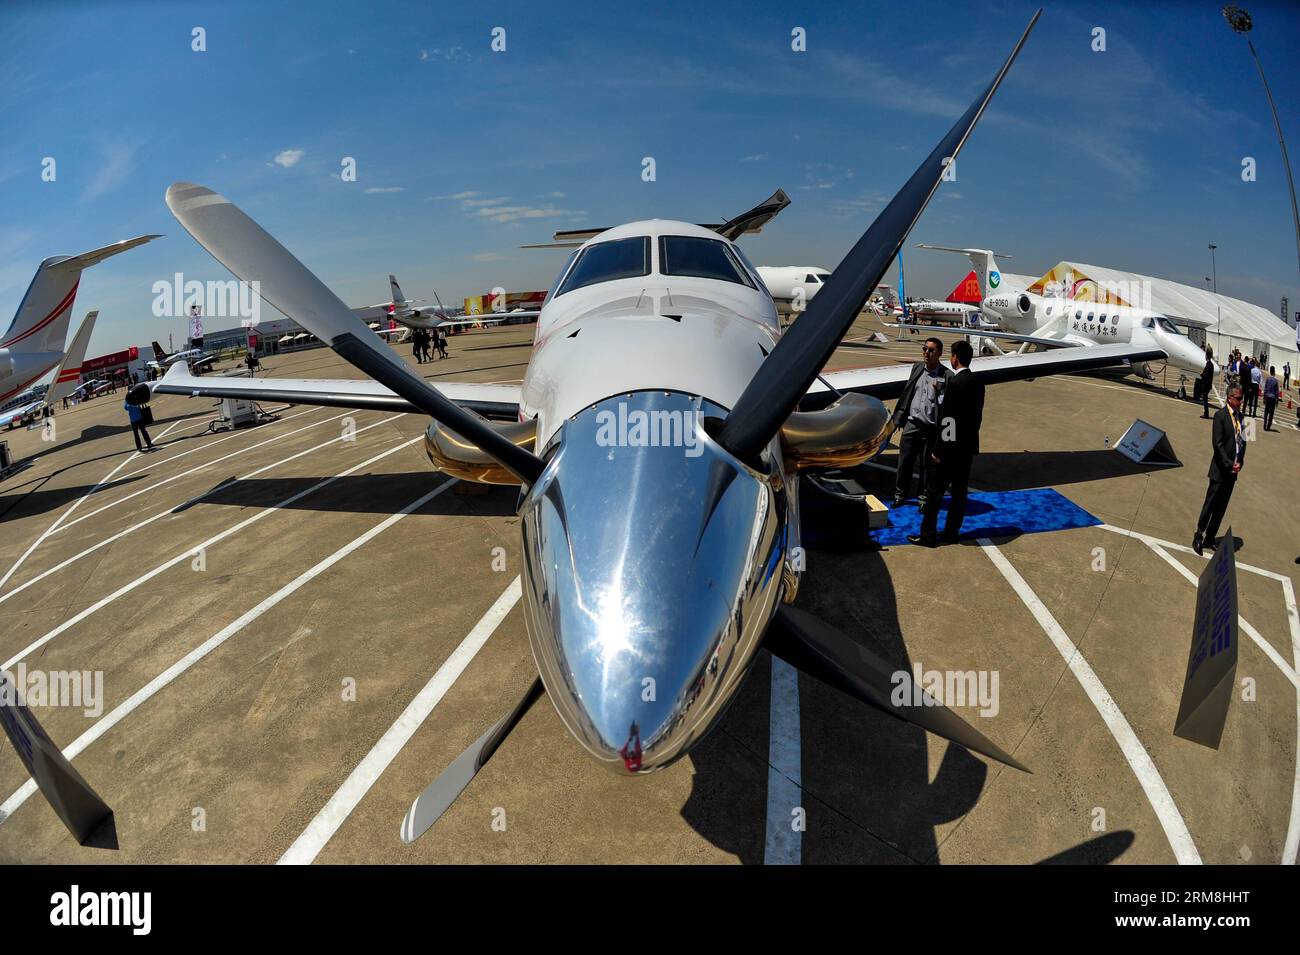 (140415) -- SHANGHAI, April 15, 2014 (Xinhua) -- A visitor looks at a Pilatus PC-12 business airplane at the 2014 Asian Business Aviation Conference & Exhibition (ABACE2014) in east China s Shanghai, April 15, 2014. ABACE2014, Asia s largest business aviation product and services event, kicked off Tuesday in Shanghai. Thirty-eight business aircrafts made by 20 manufacturers, including Boeing, Airbus and Bombardier, will be displayed during the three-day event. Their prices range from 3 million yuan (482,000 U.S. dollars) to 560 million yuan (89.99 million U.S. dollars). (Xinhua/Yang Guang) (lm Stock Photo